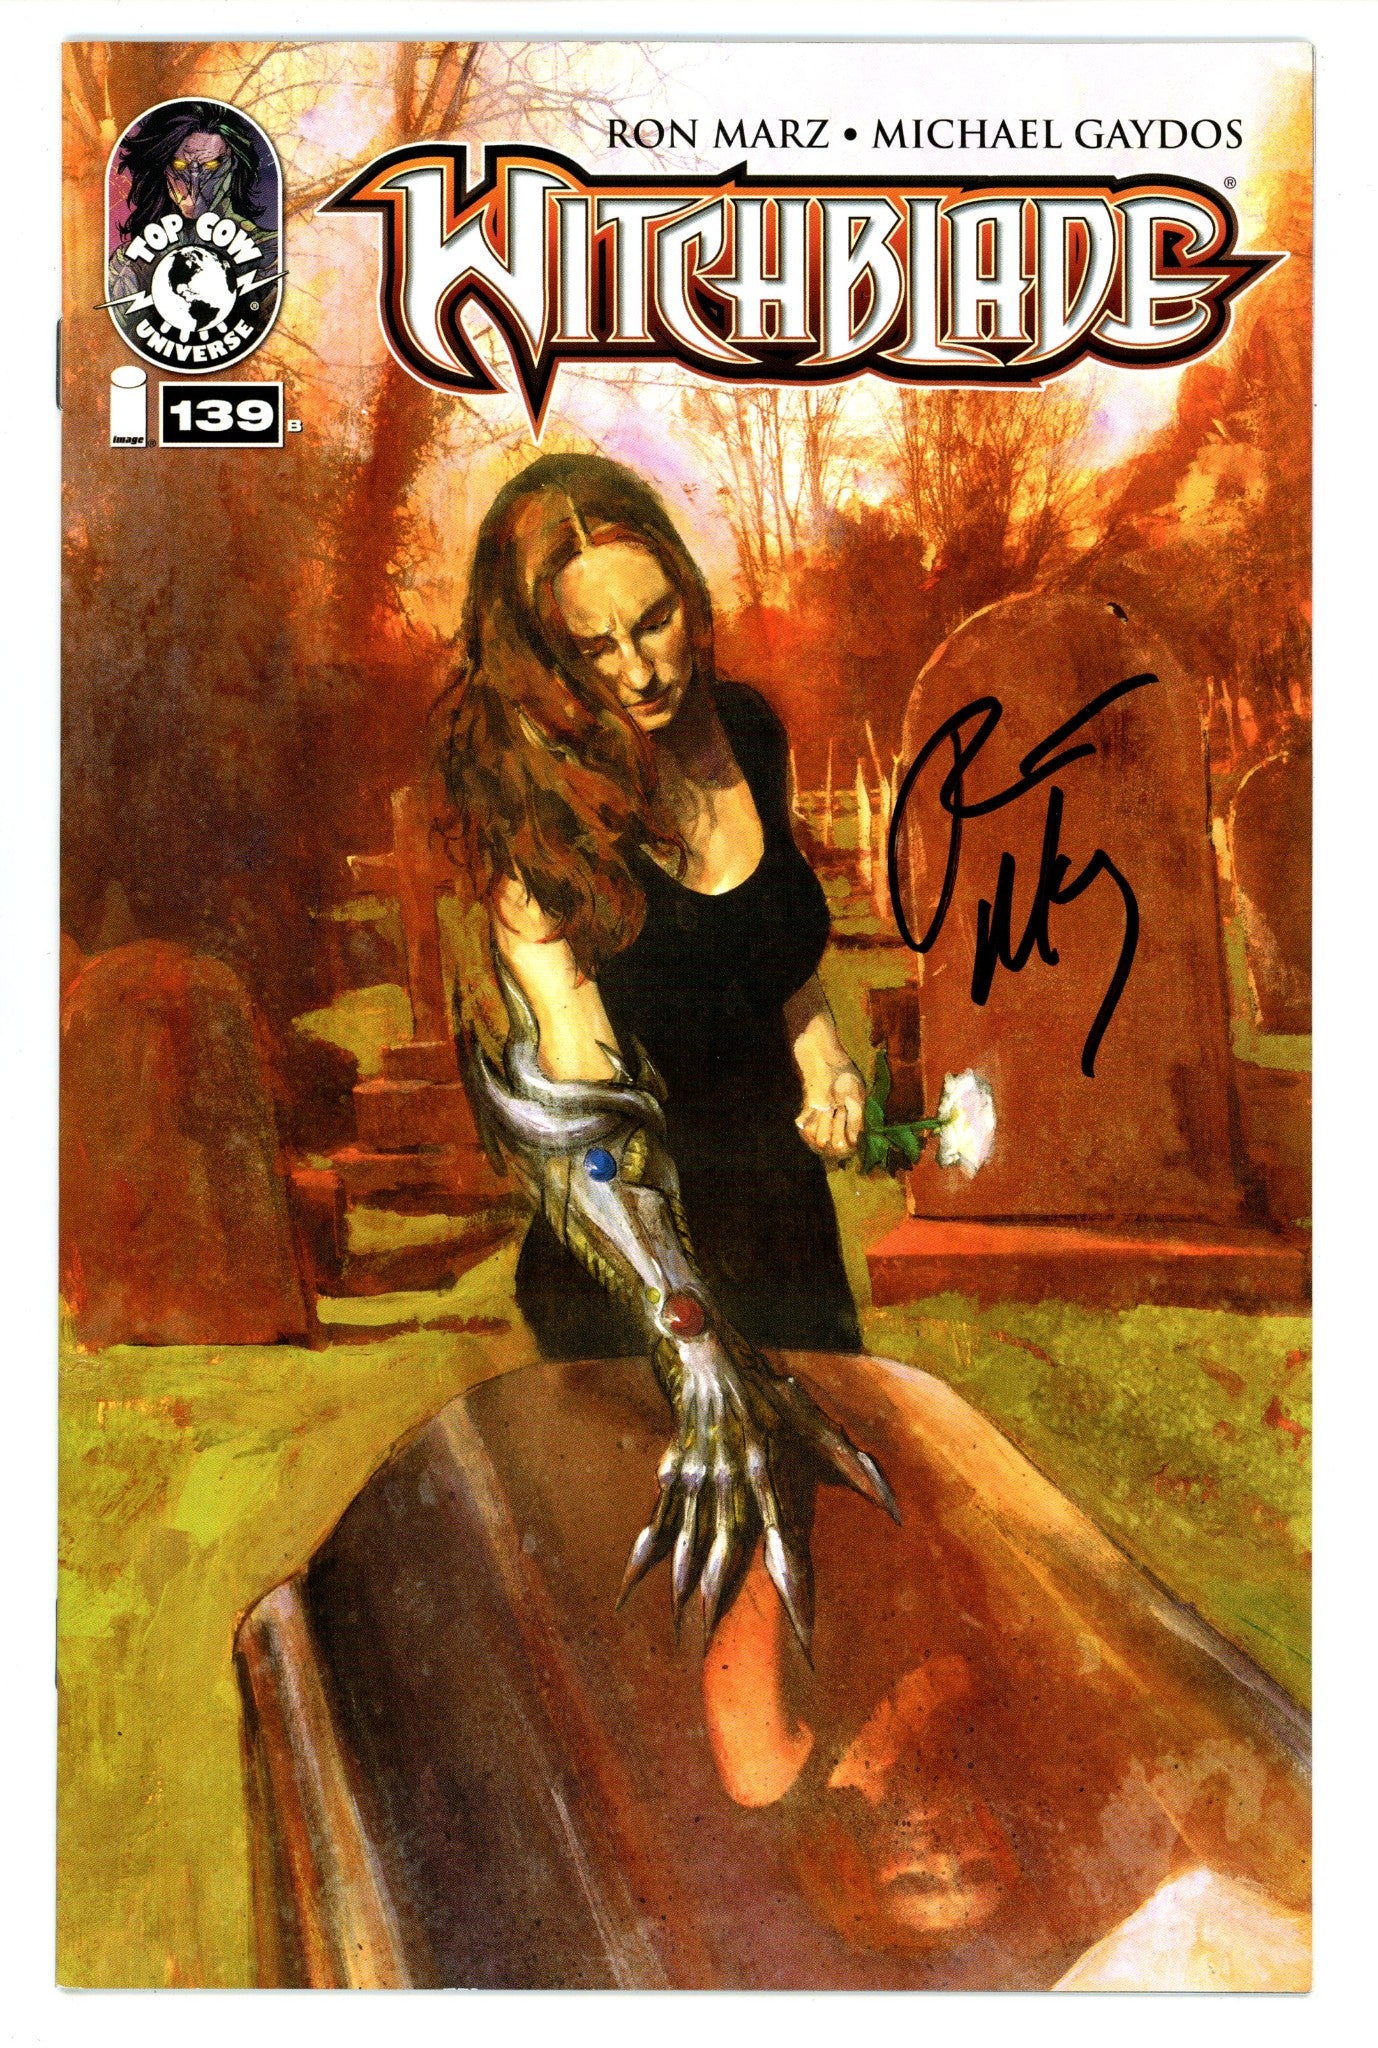 Witchblade Vol 1 139 VF+ (8.5) (2010) Gaydos Variant Signed x1 Cover Ron Marz 